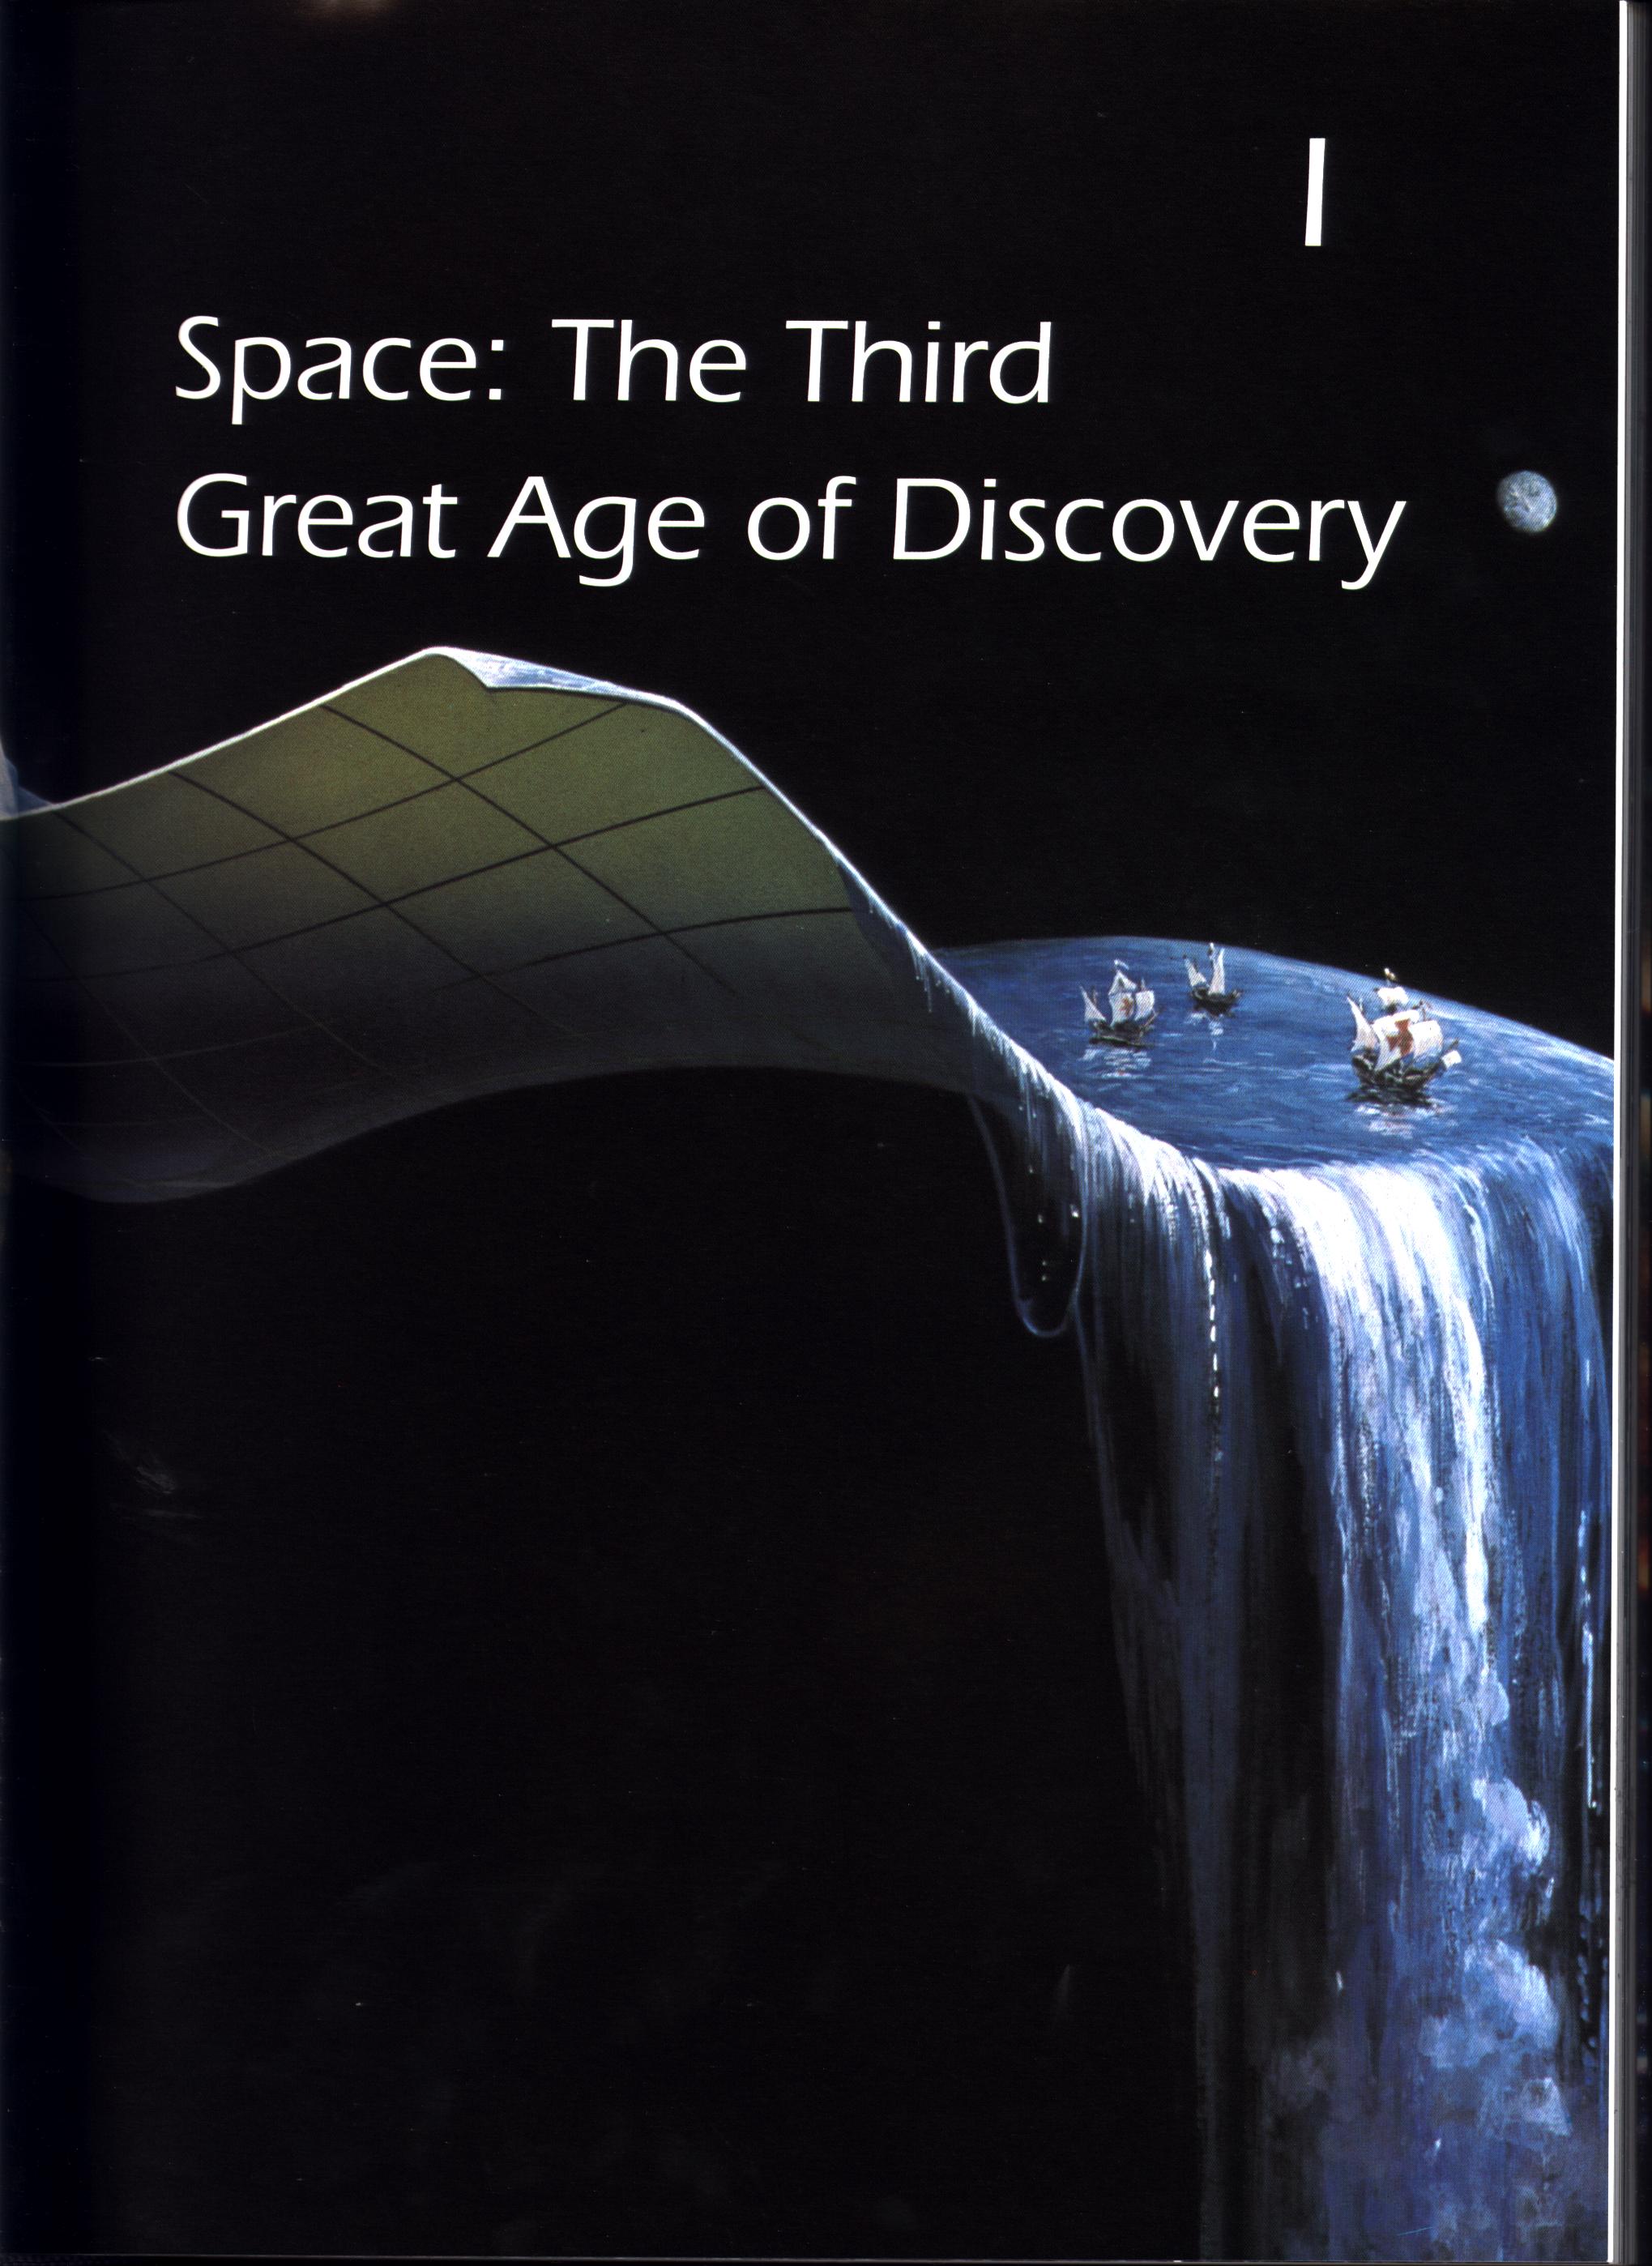 SPACE: discovery and exploration. sisc8583d